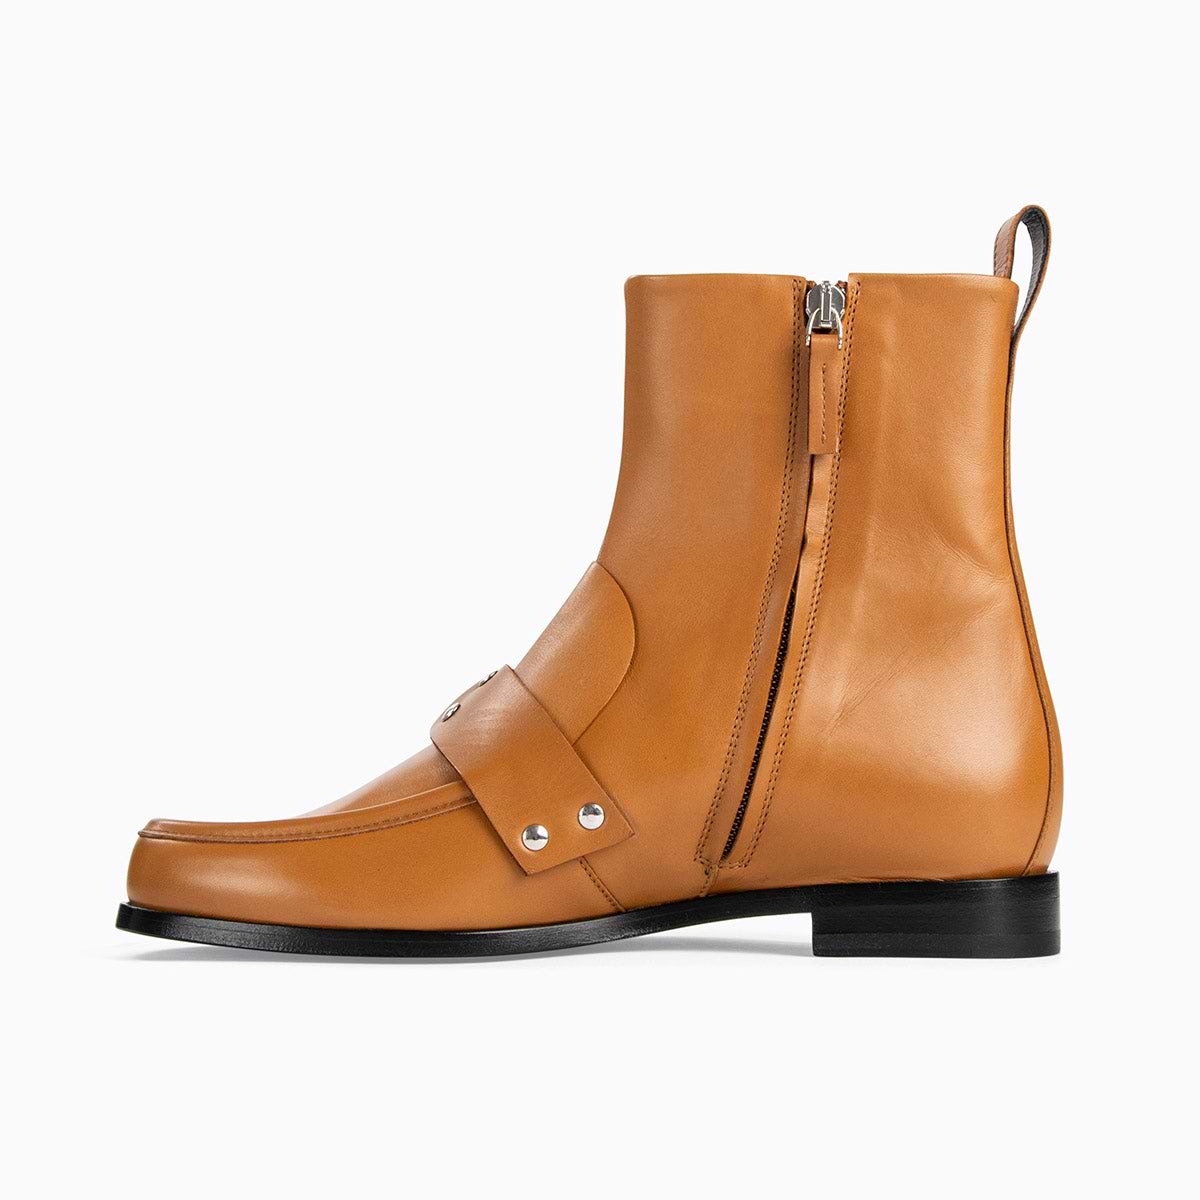 RIDER ANKLE BOOT